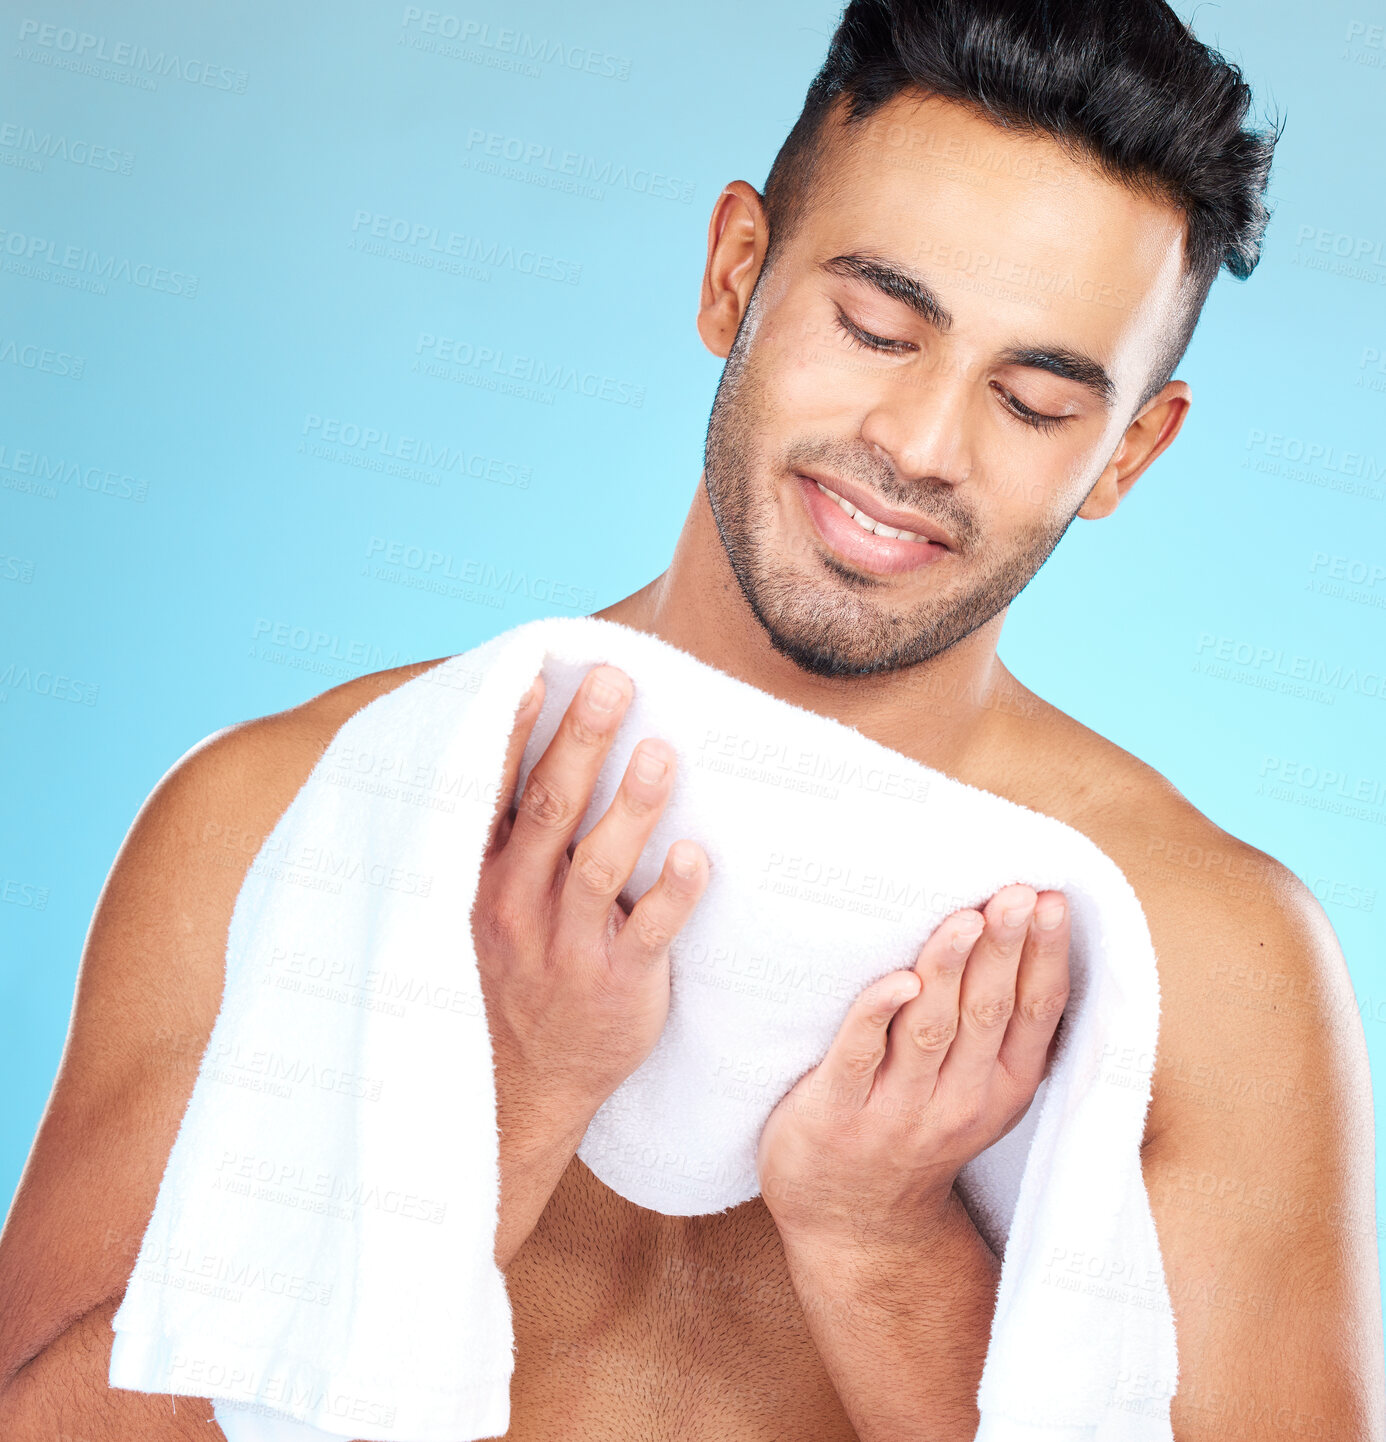 Buy stock photo Cleaning, towel and face of man clean after wellness wash, facial cleaning routine and skincare mockup. Happiness, smile and person after bath or shower for body self car on blue studio background